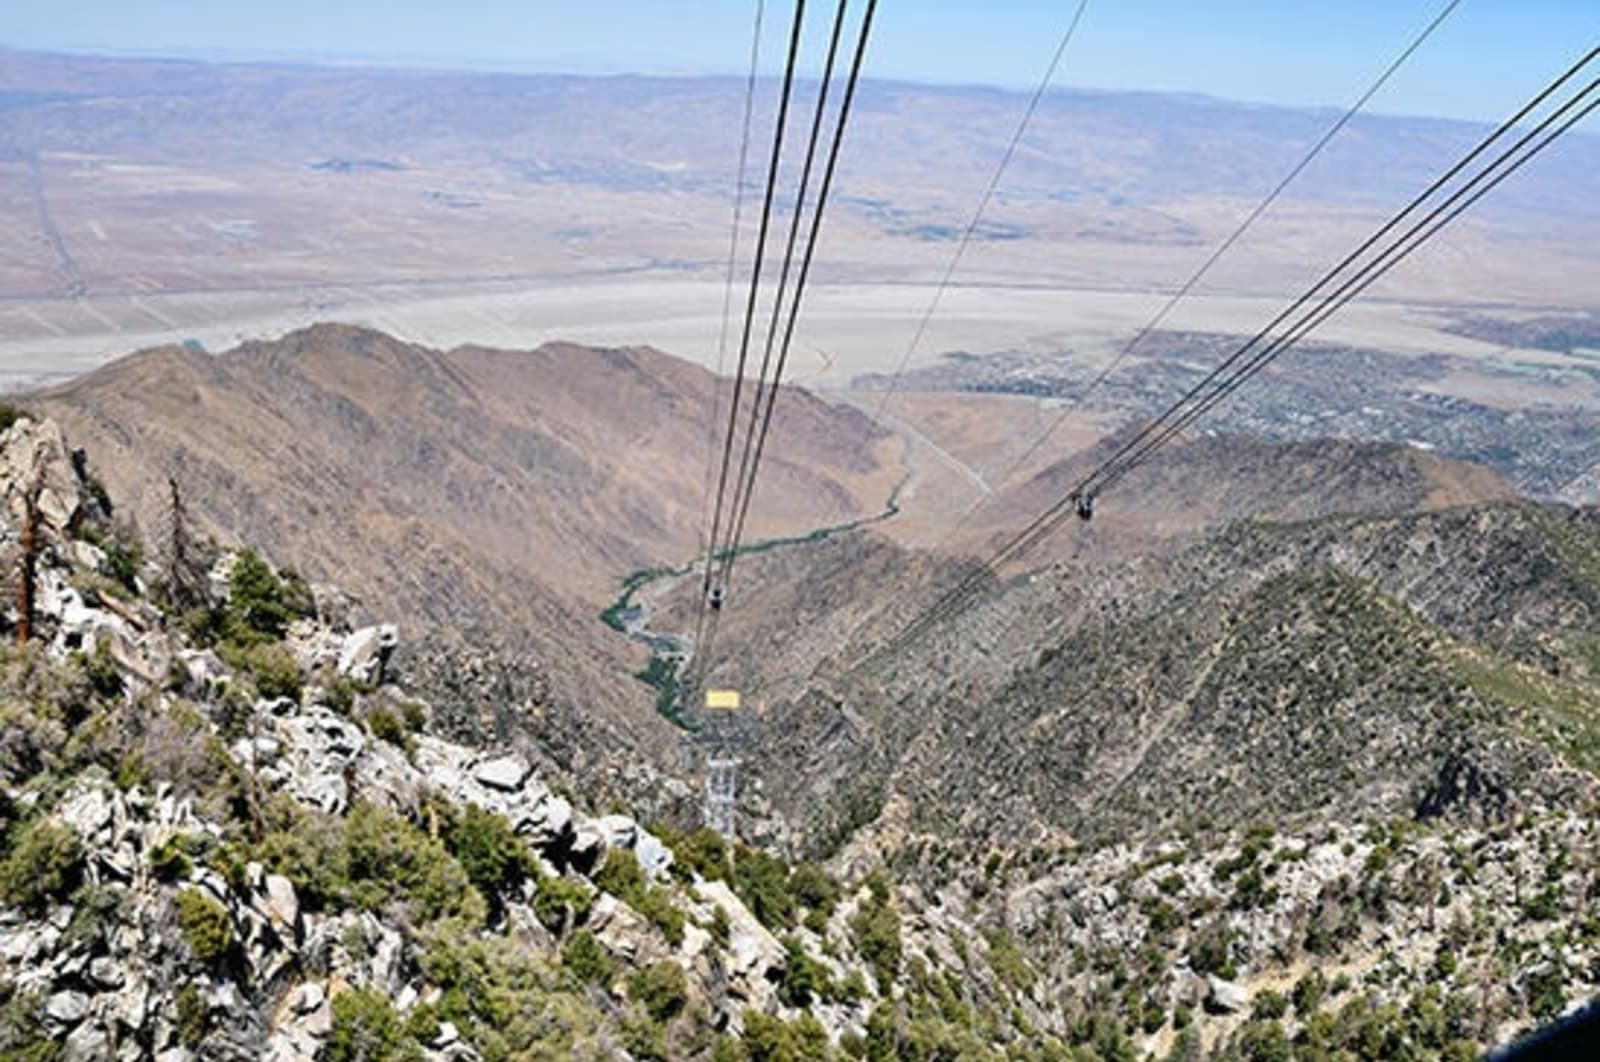 RS-Palm-Springs-from-Aerial-Tramway-shutterstock_56655958.jpg